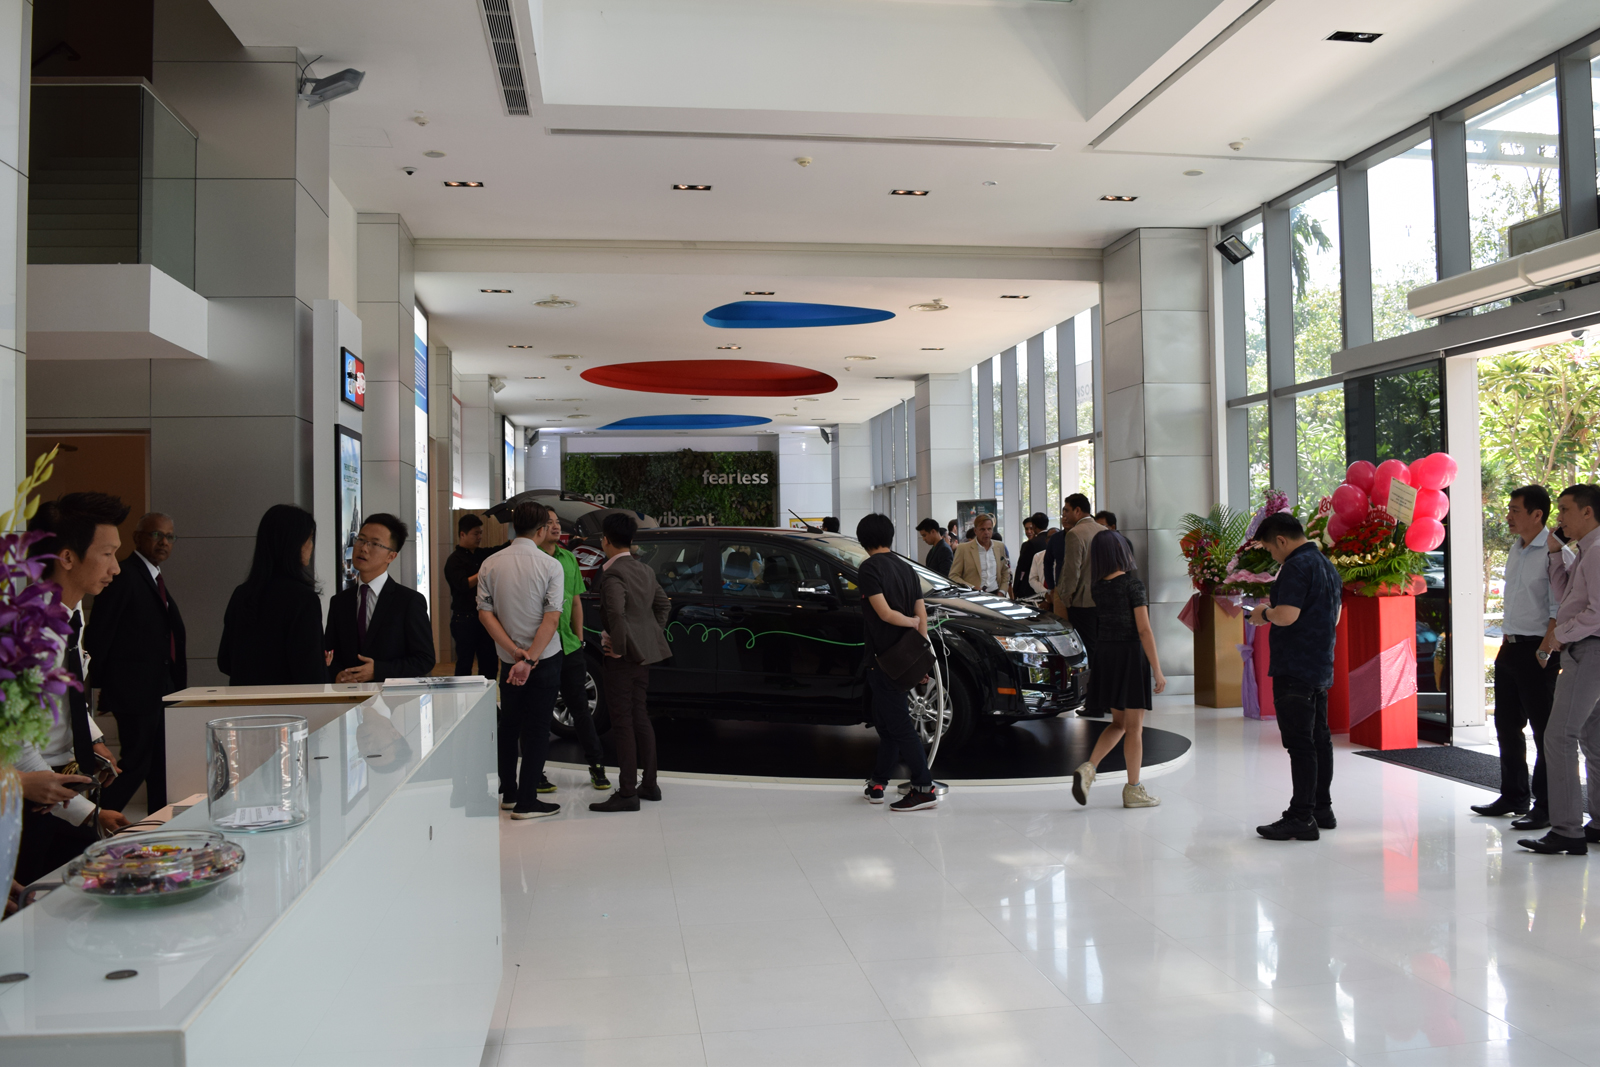 Residents of Singapore check out the first ever EV Experience Centre at the Global Innovation Centre